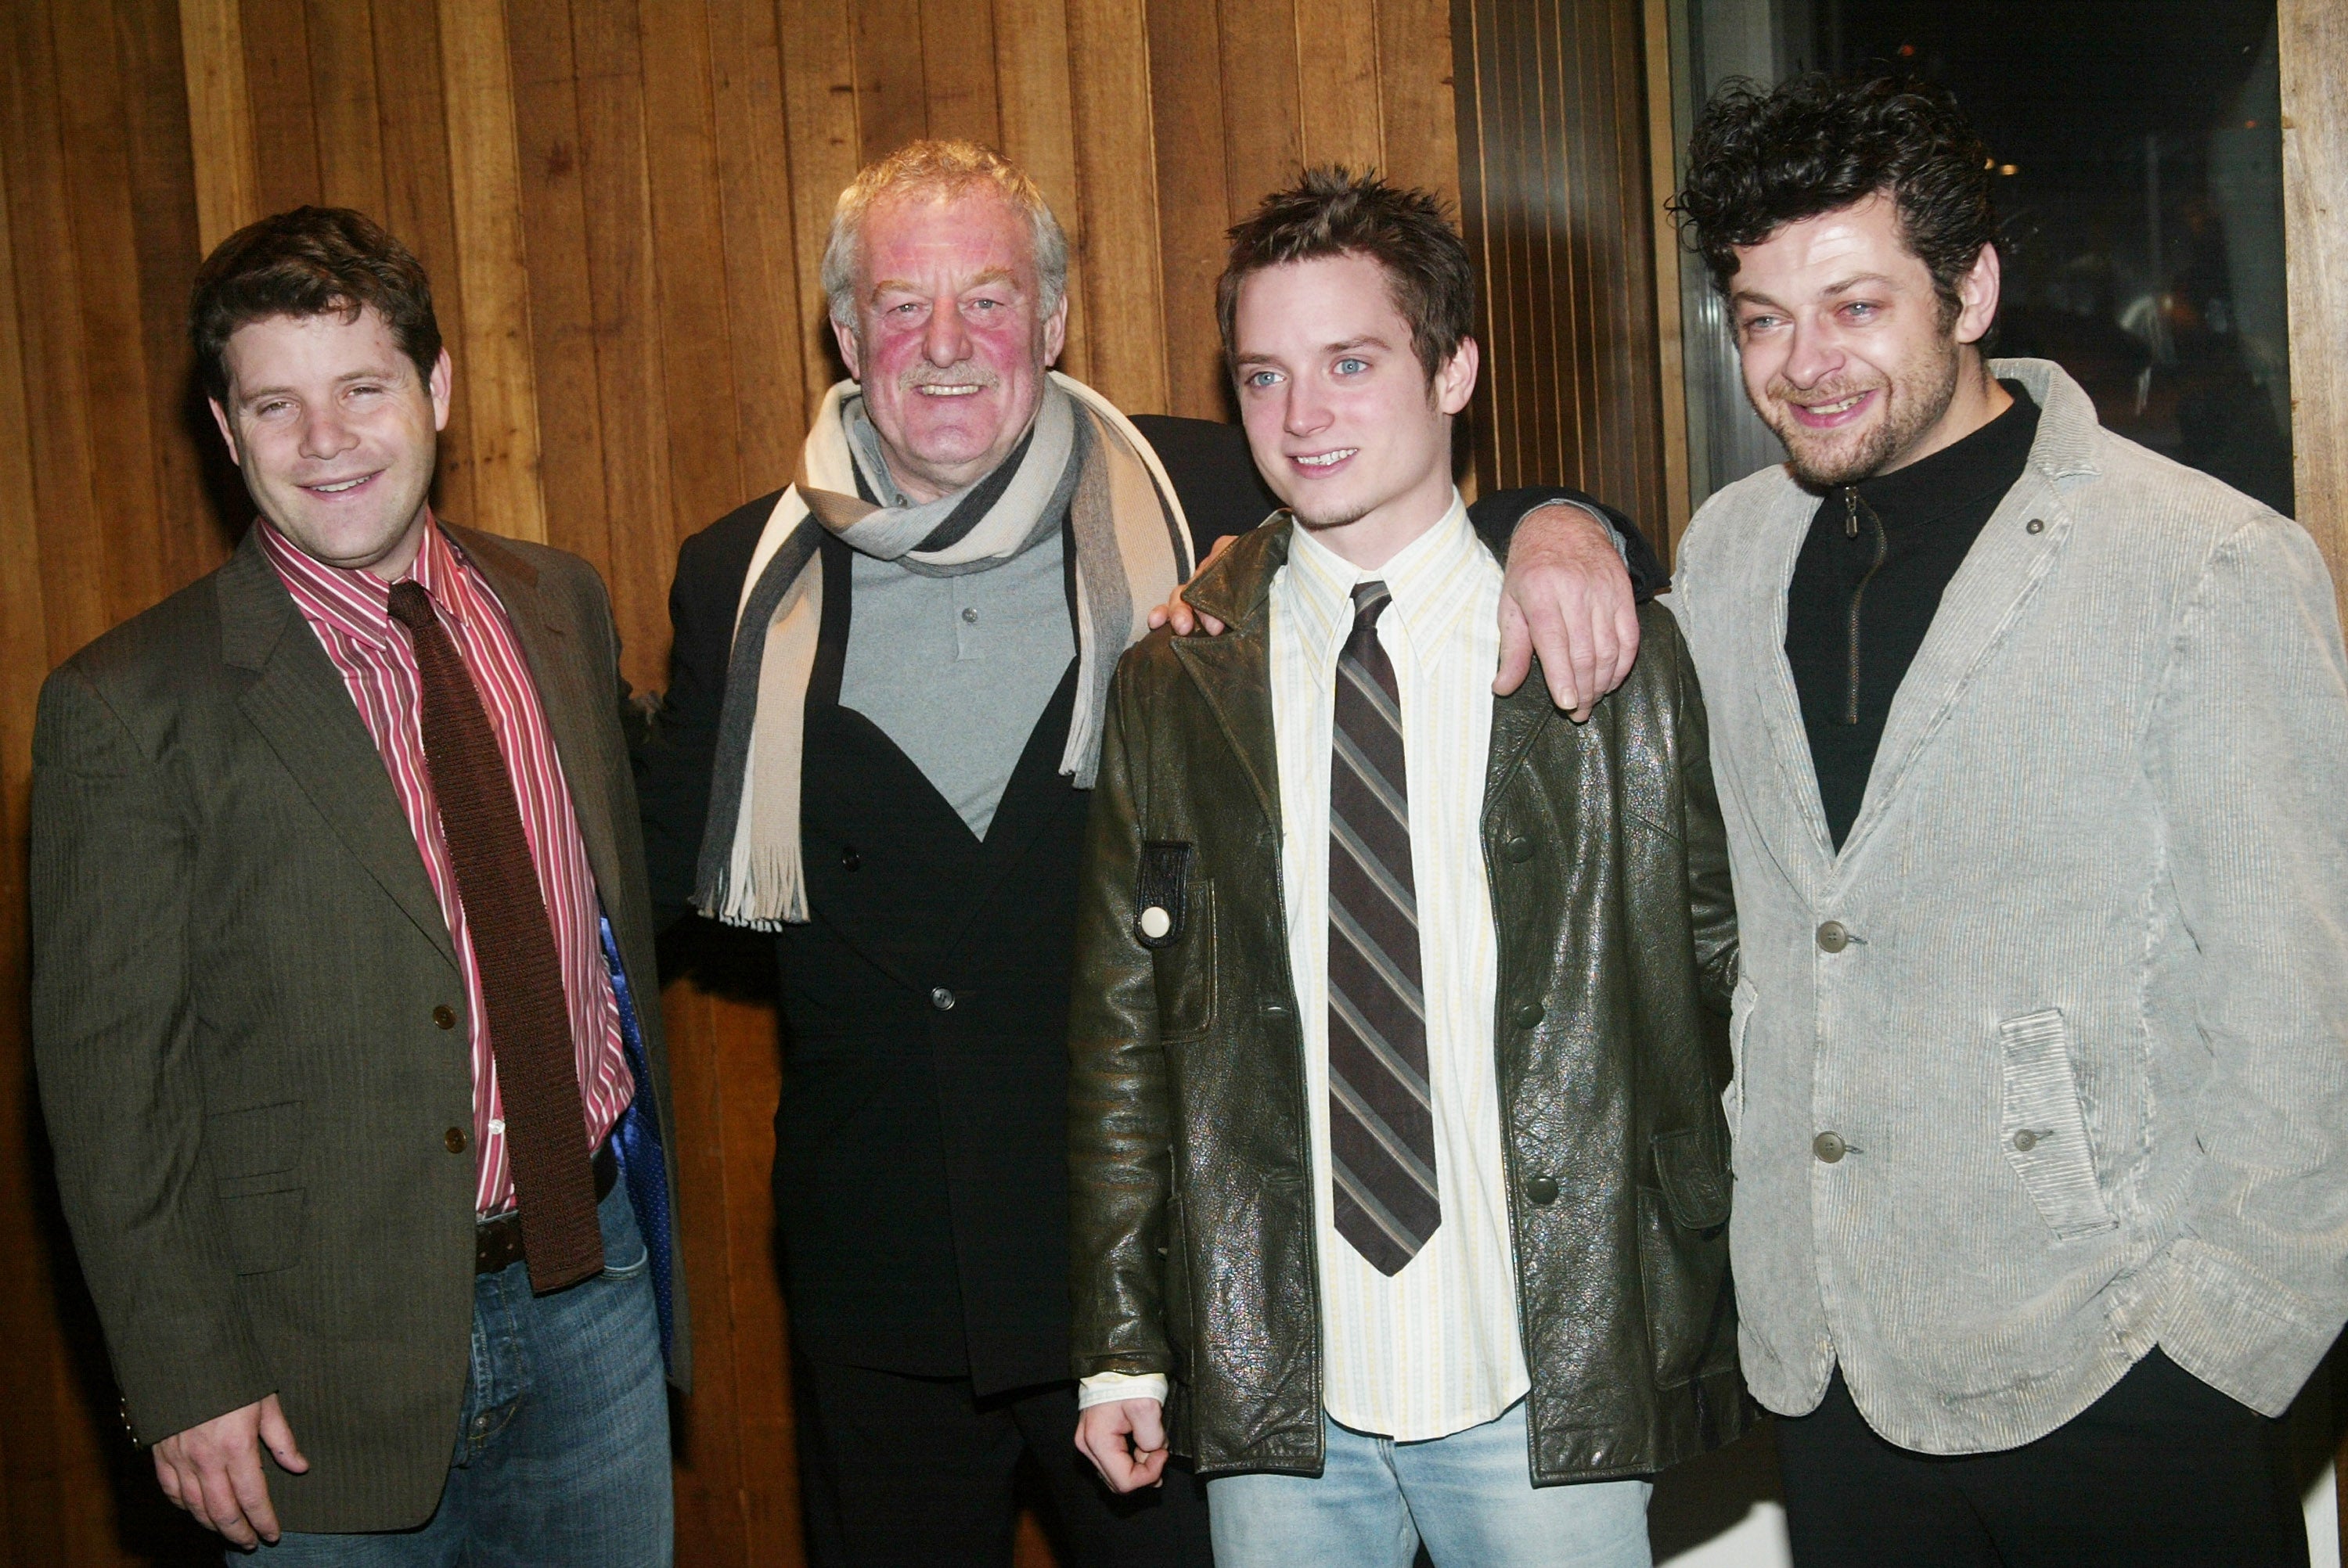 Actors Sean Astin, Bernard Hill, Elijah Wood and Andy Serkis attend a Film Society of Lincoln Center special screening of ‘The Lord Of The Rings’ trilogy in New York City in 2004